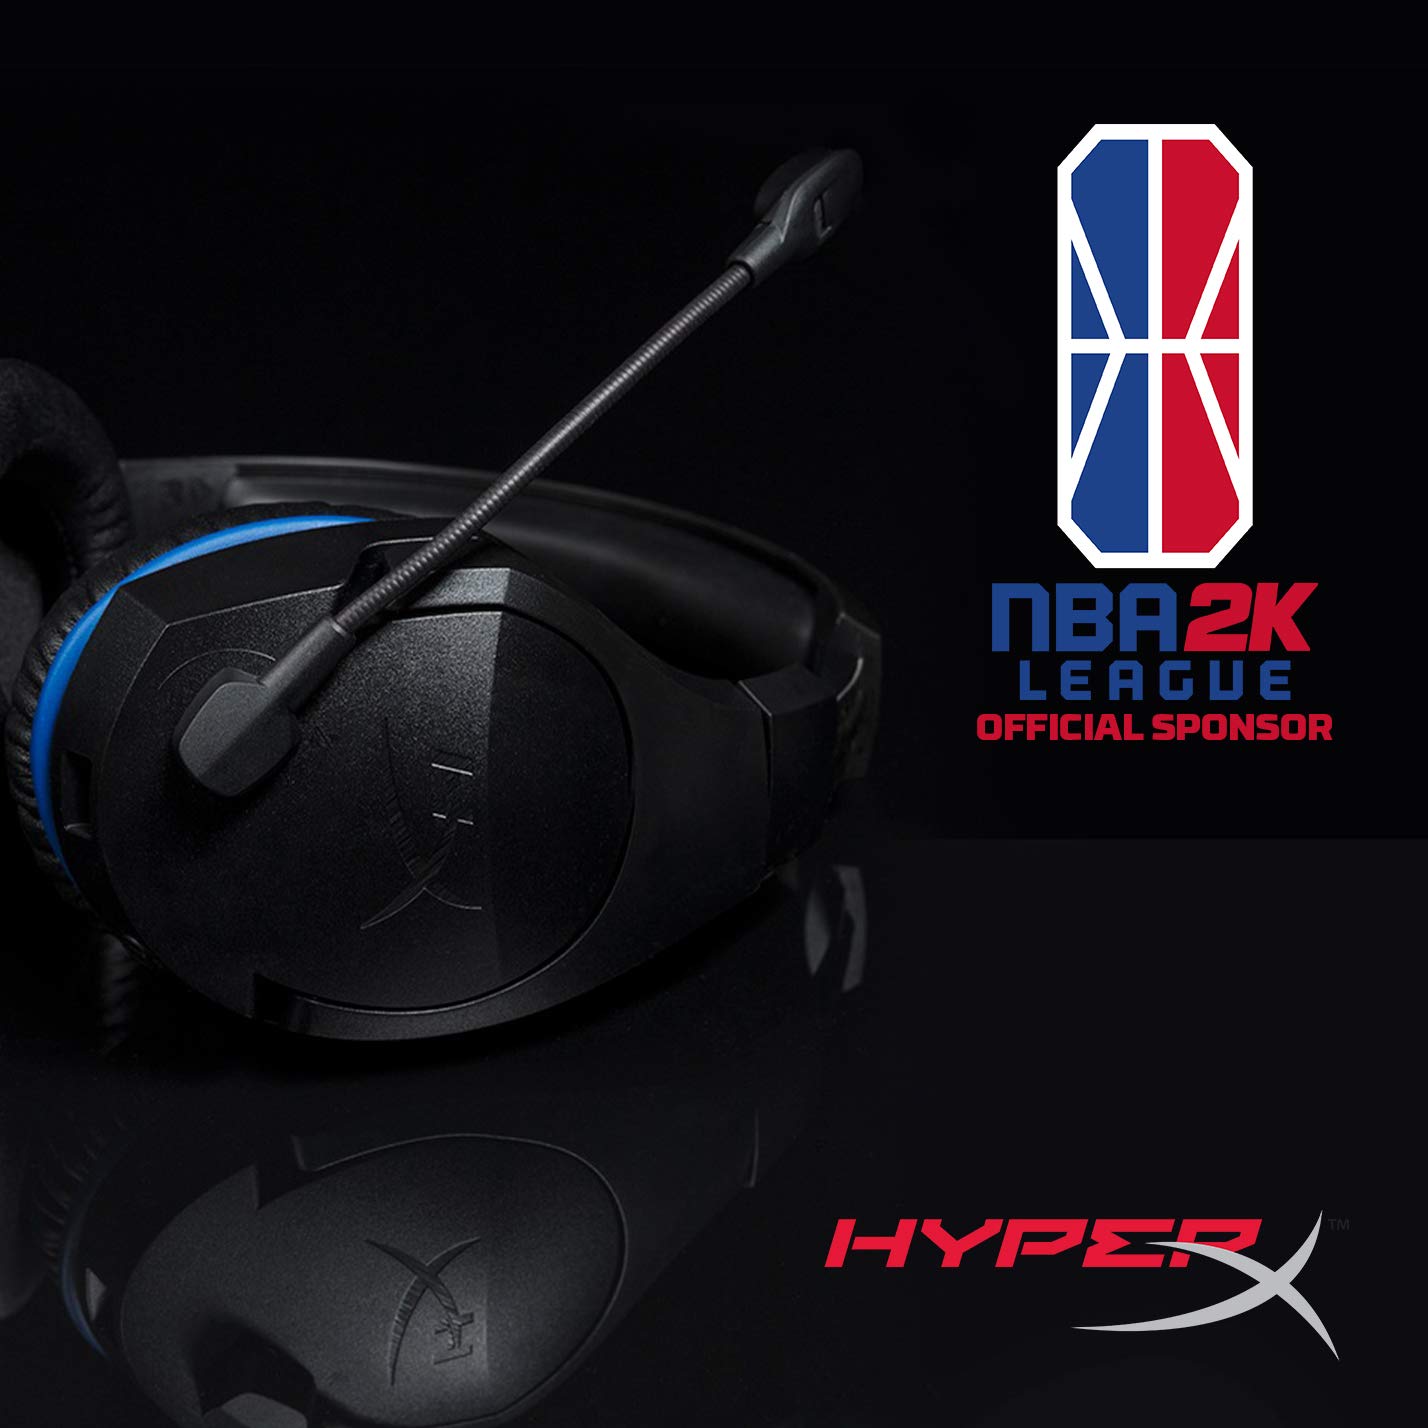 HyperX Cloud Stinger Wireless - Gaming Headset with Long Lasting Battery up to 17 Hours of Use, Immersive In-Game Audio, Noise Cancelling Microphone, Comfortable Memory Foam, and Designed for PS4